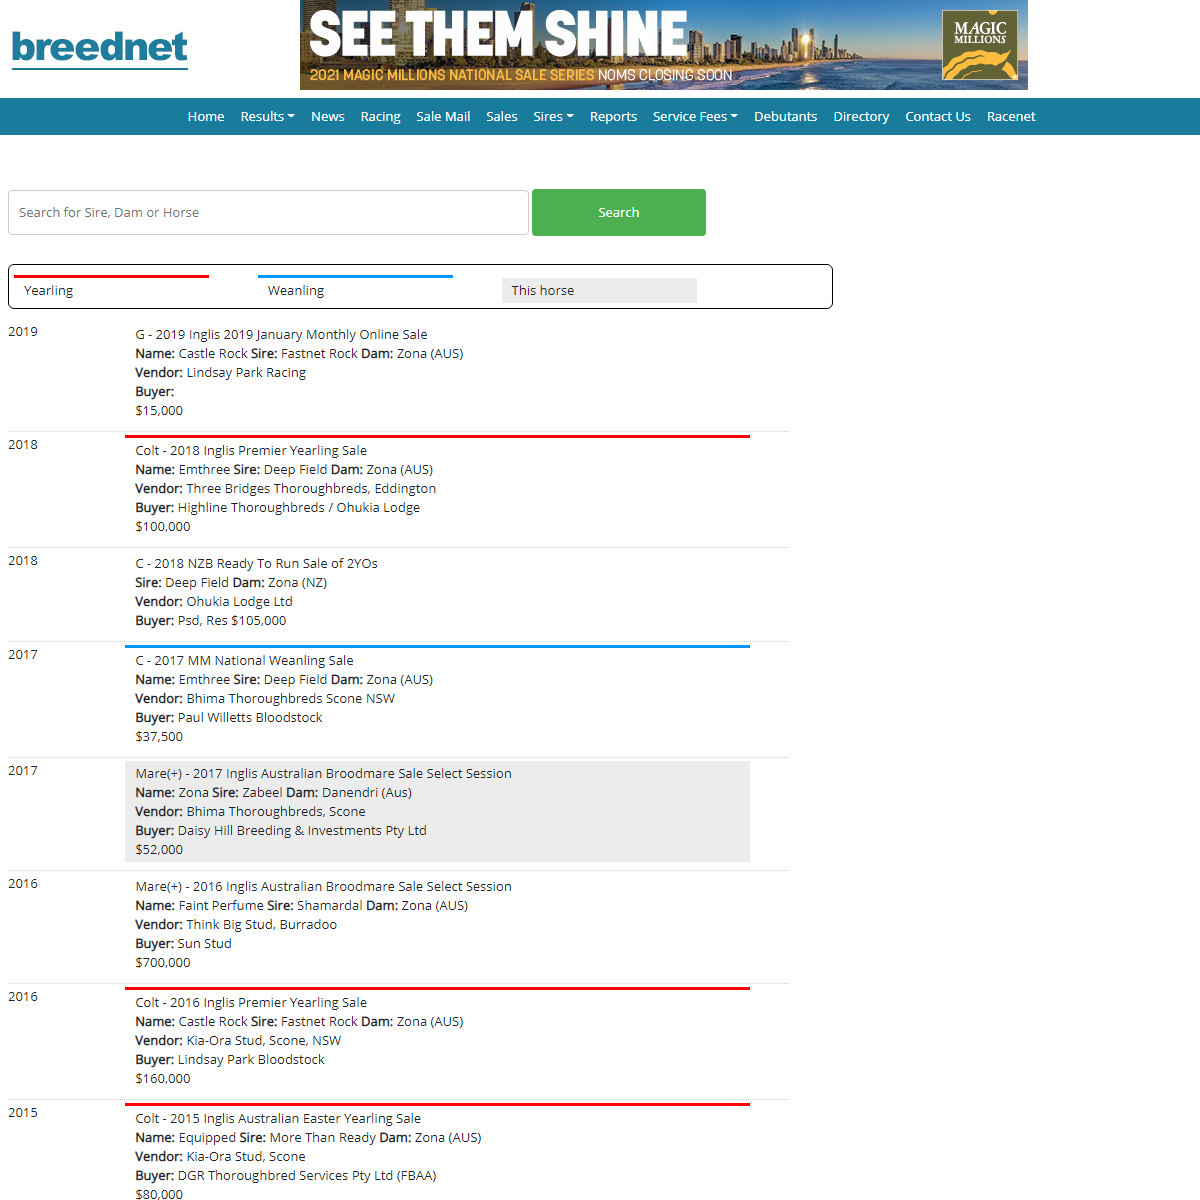 A complete backup of https://www.breednet.com.au/search/?dam=Zona